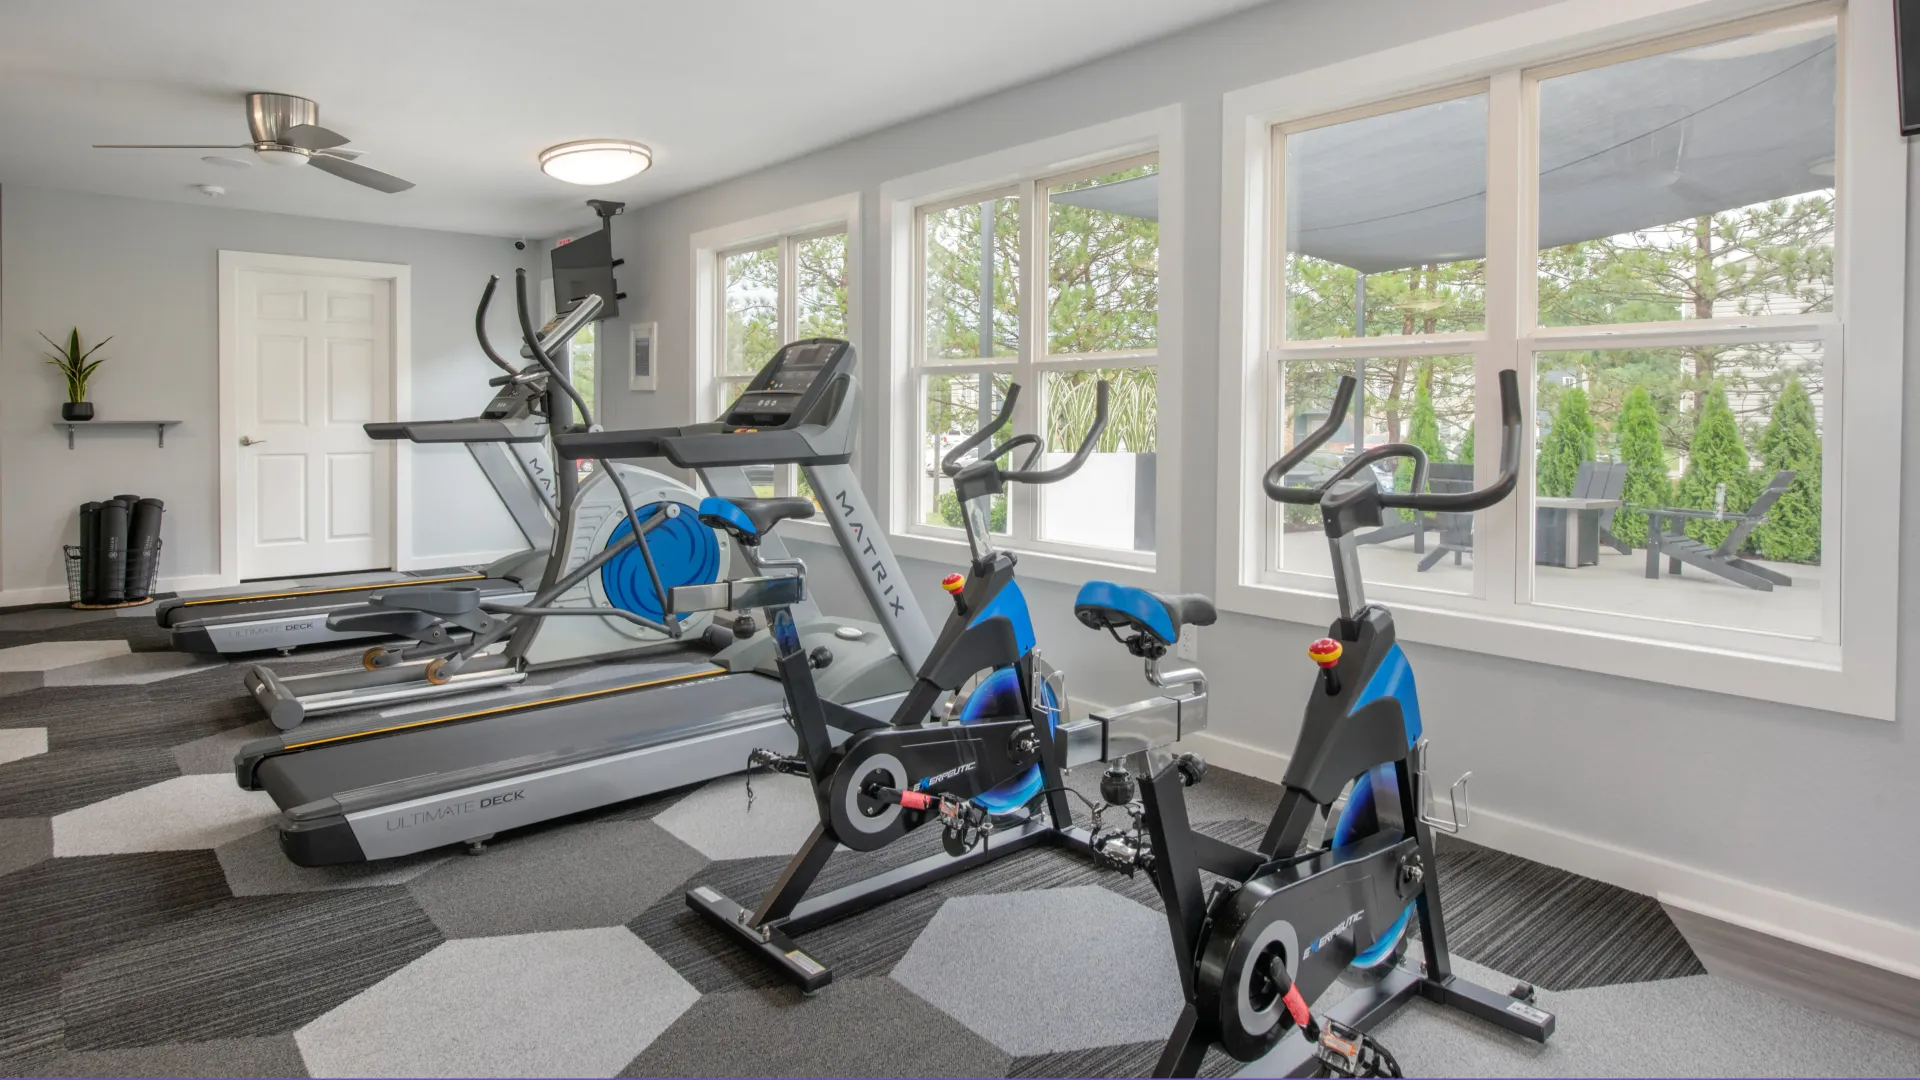 A variety of cardio equipment with a view of the outdoor patio and firepit, a glimpse of relaxation after your workout.